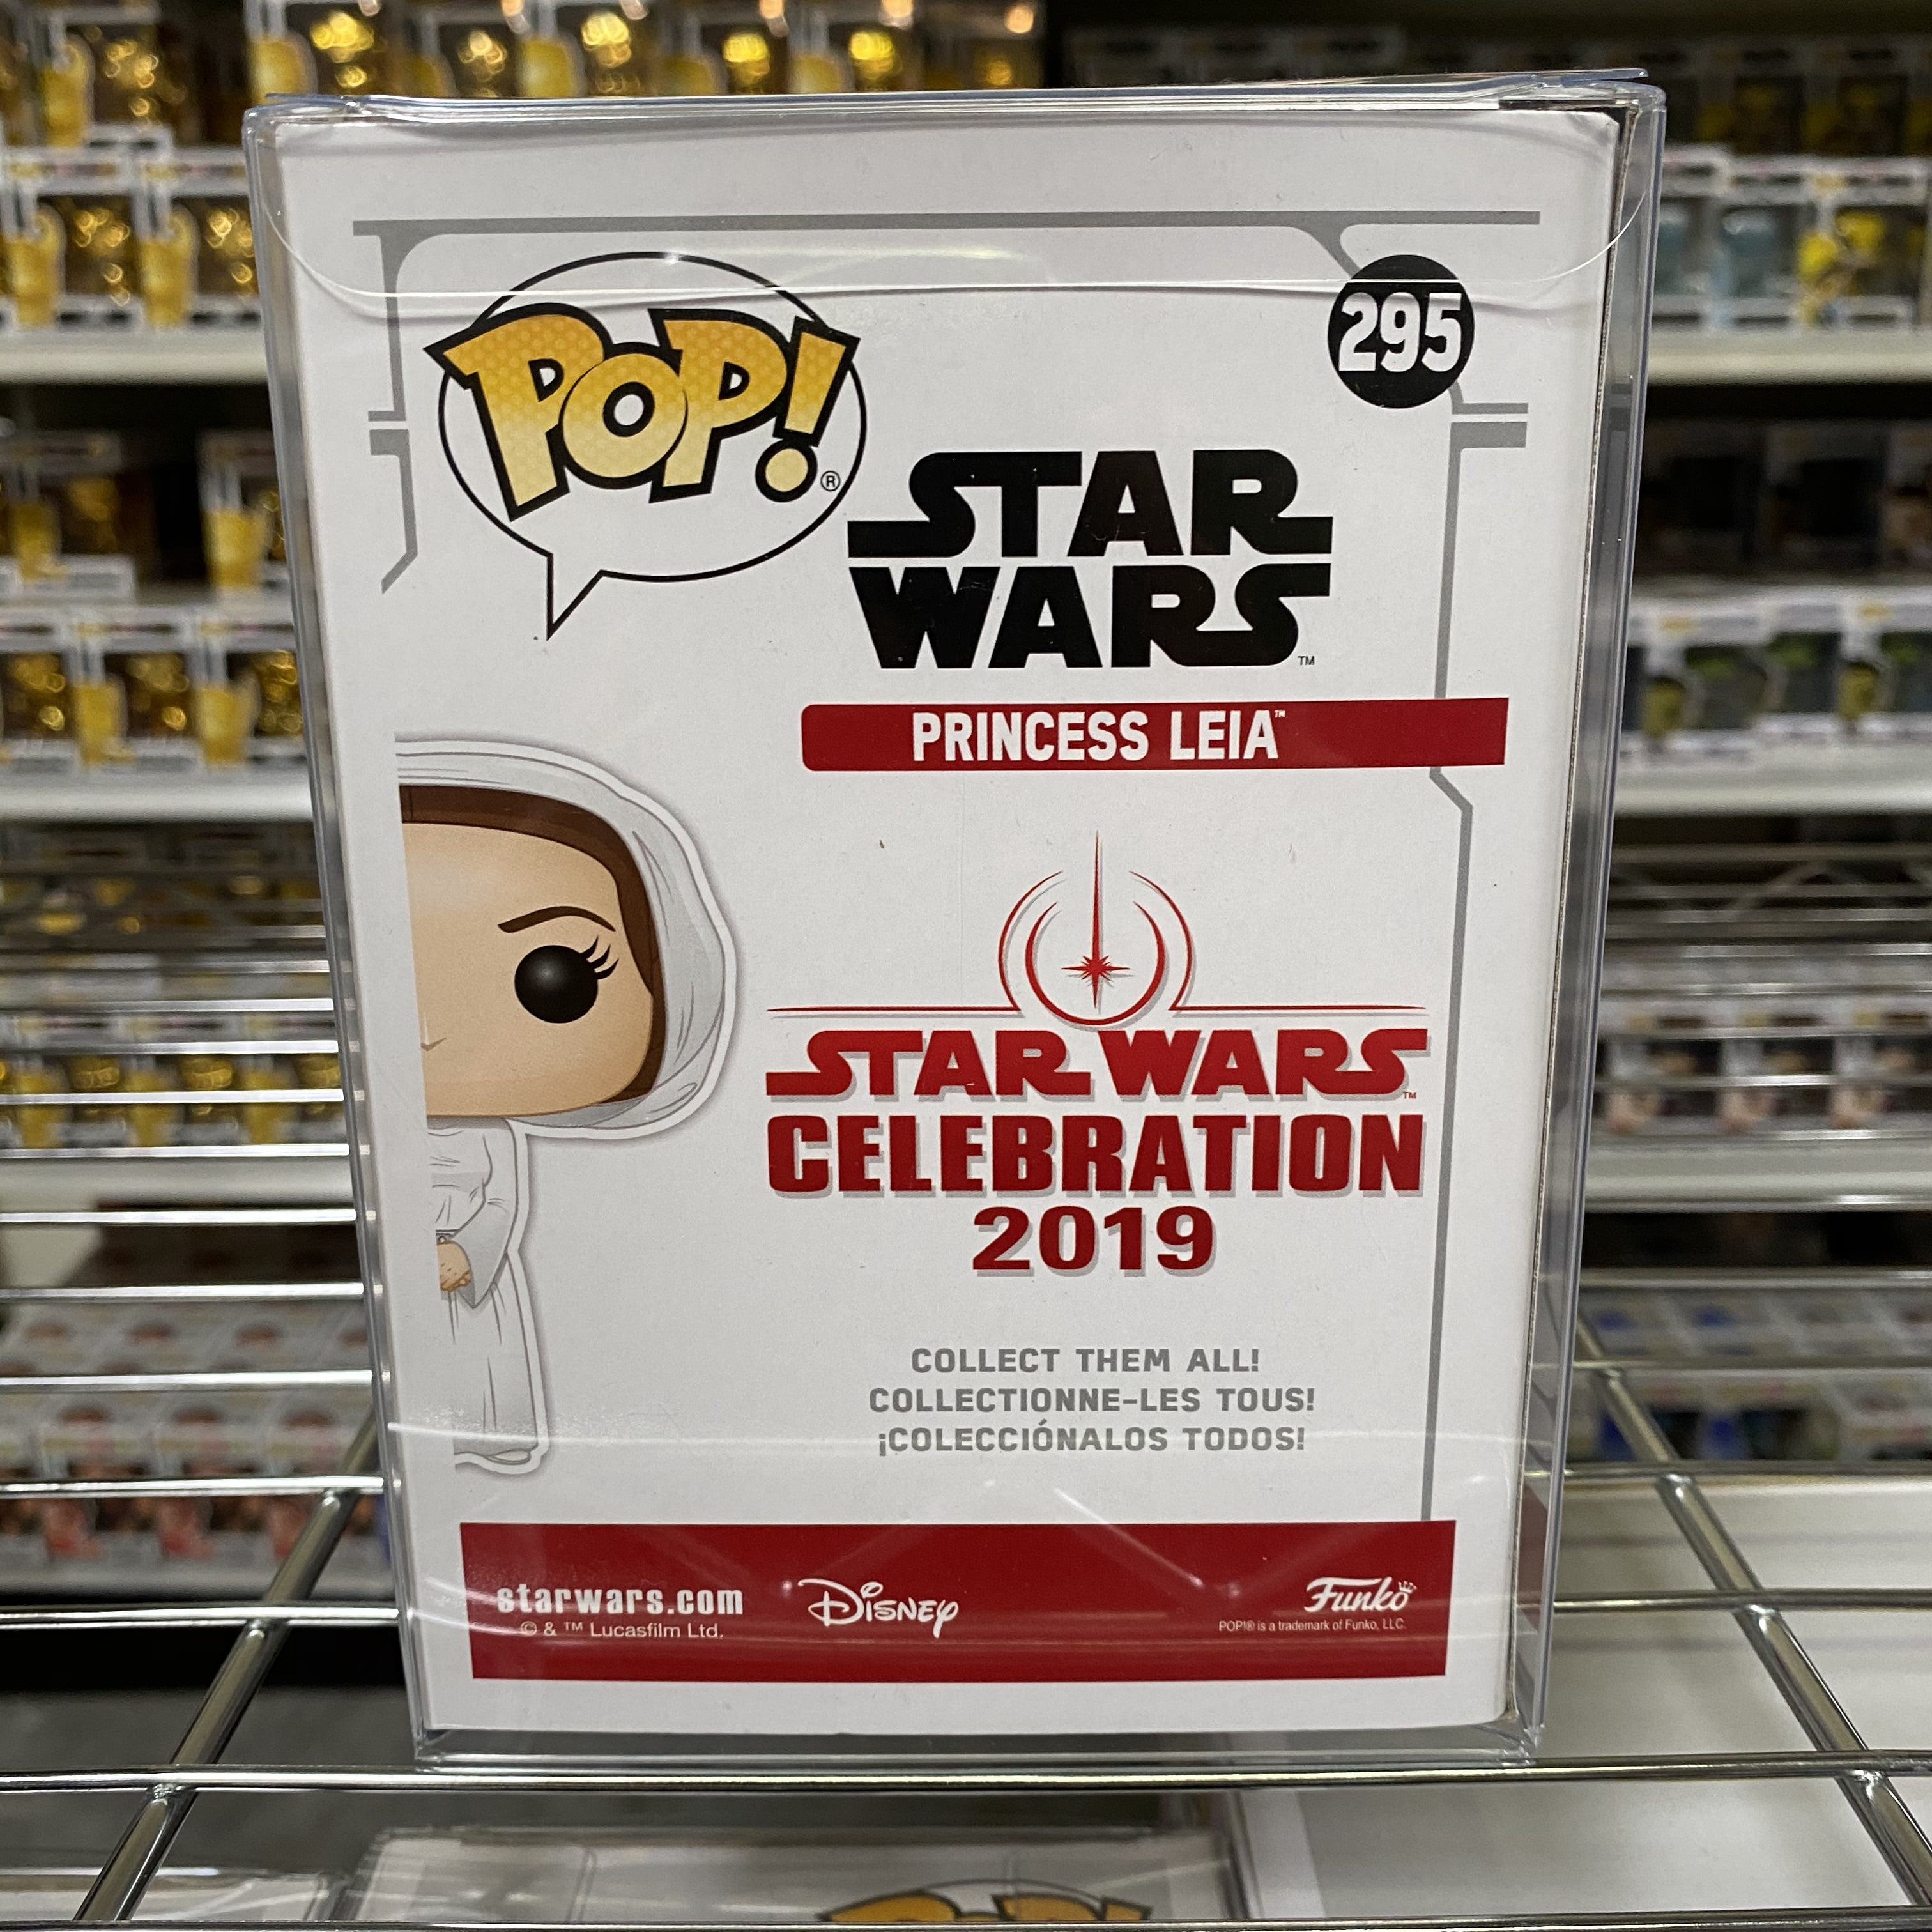 Exclusive Details about   Funko Pop Star Wars Princess Leia #295 gold Chrome 2019 Galactic Conv 